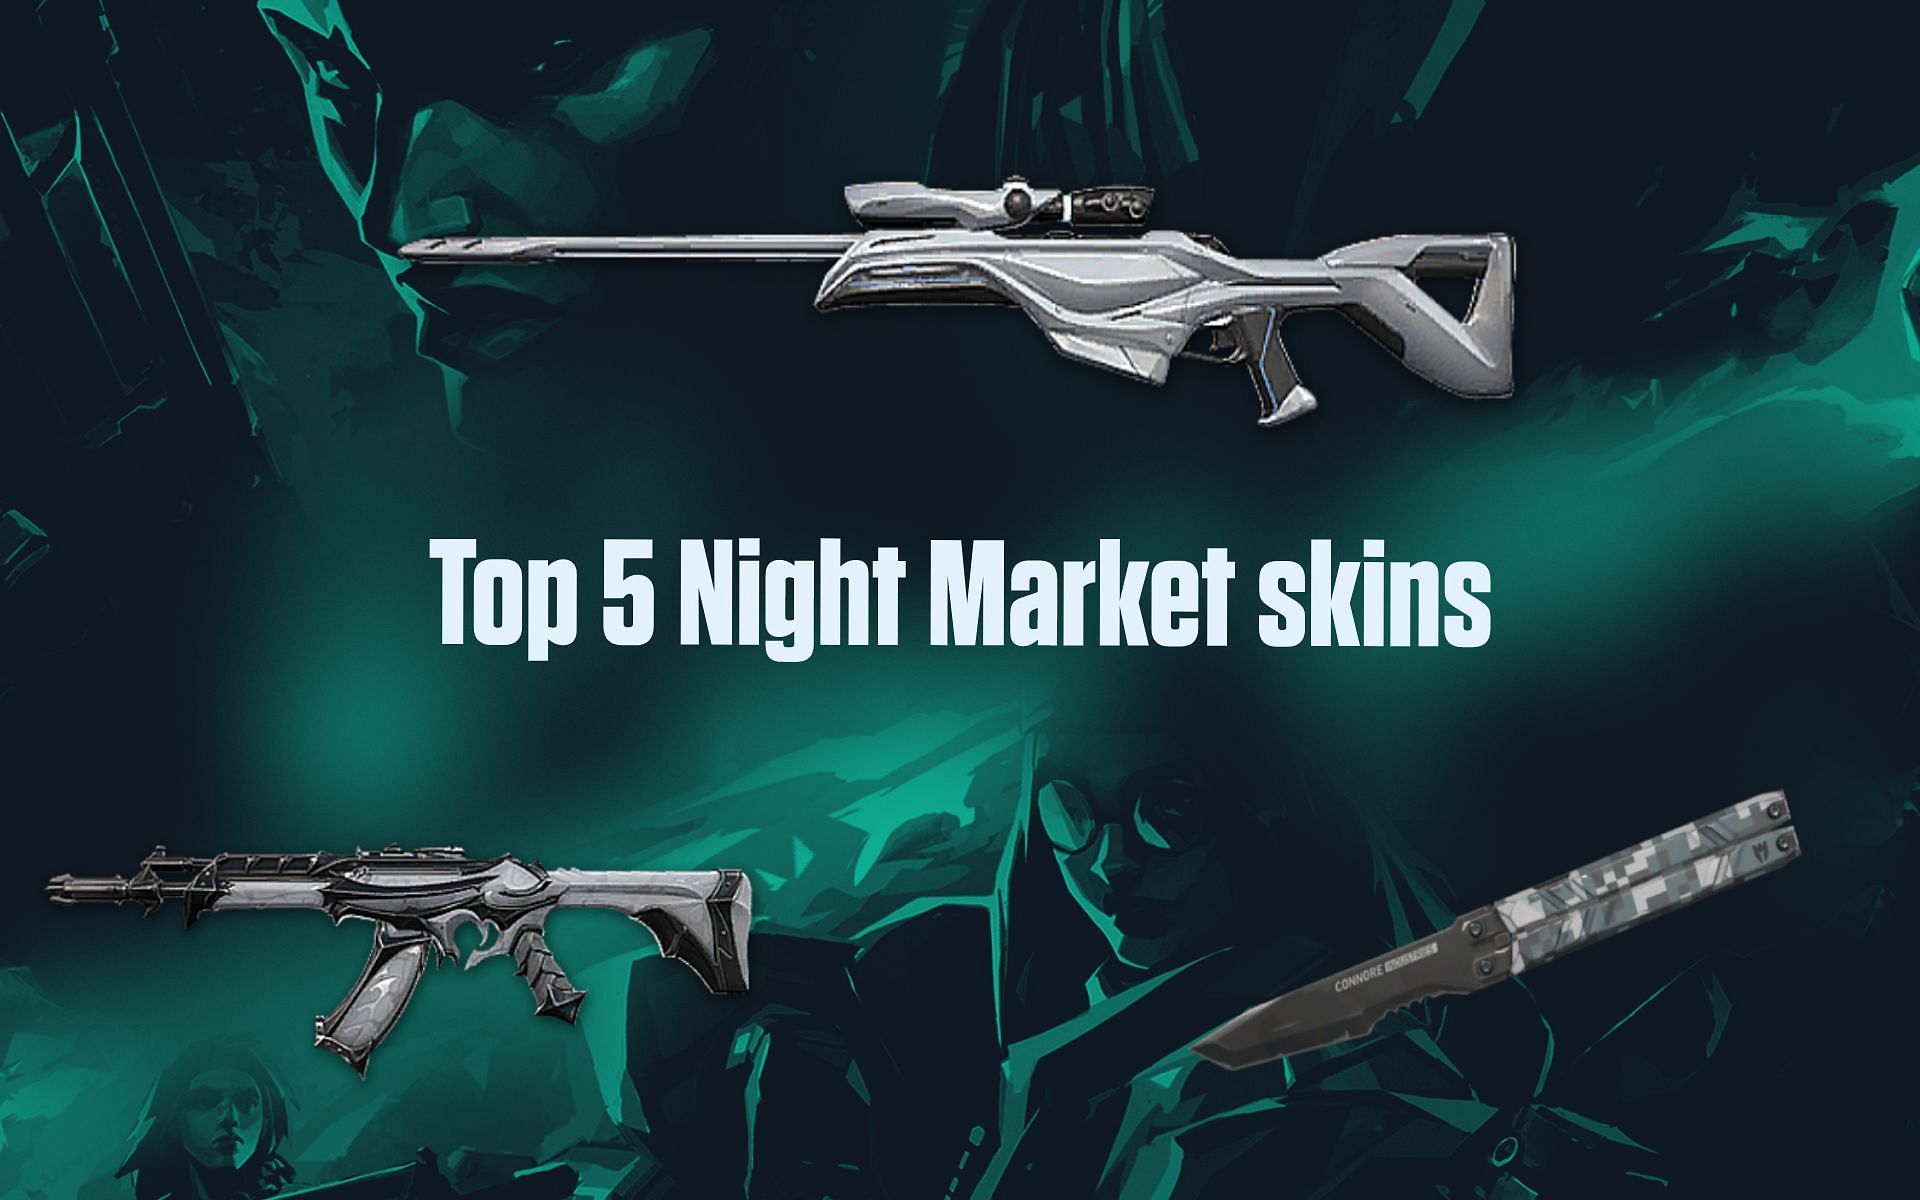 Top 5 skin collections from the upcoming Night Market (Image via Sportskeeda)